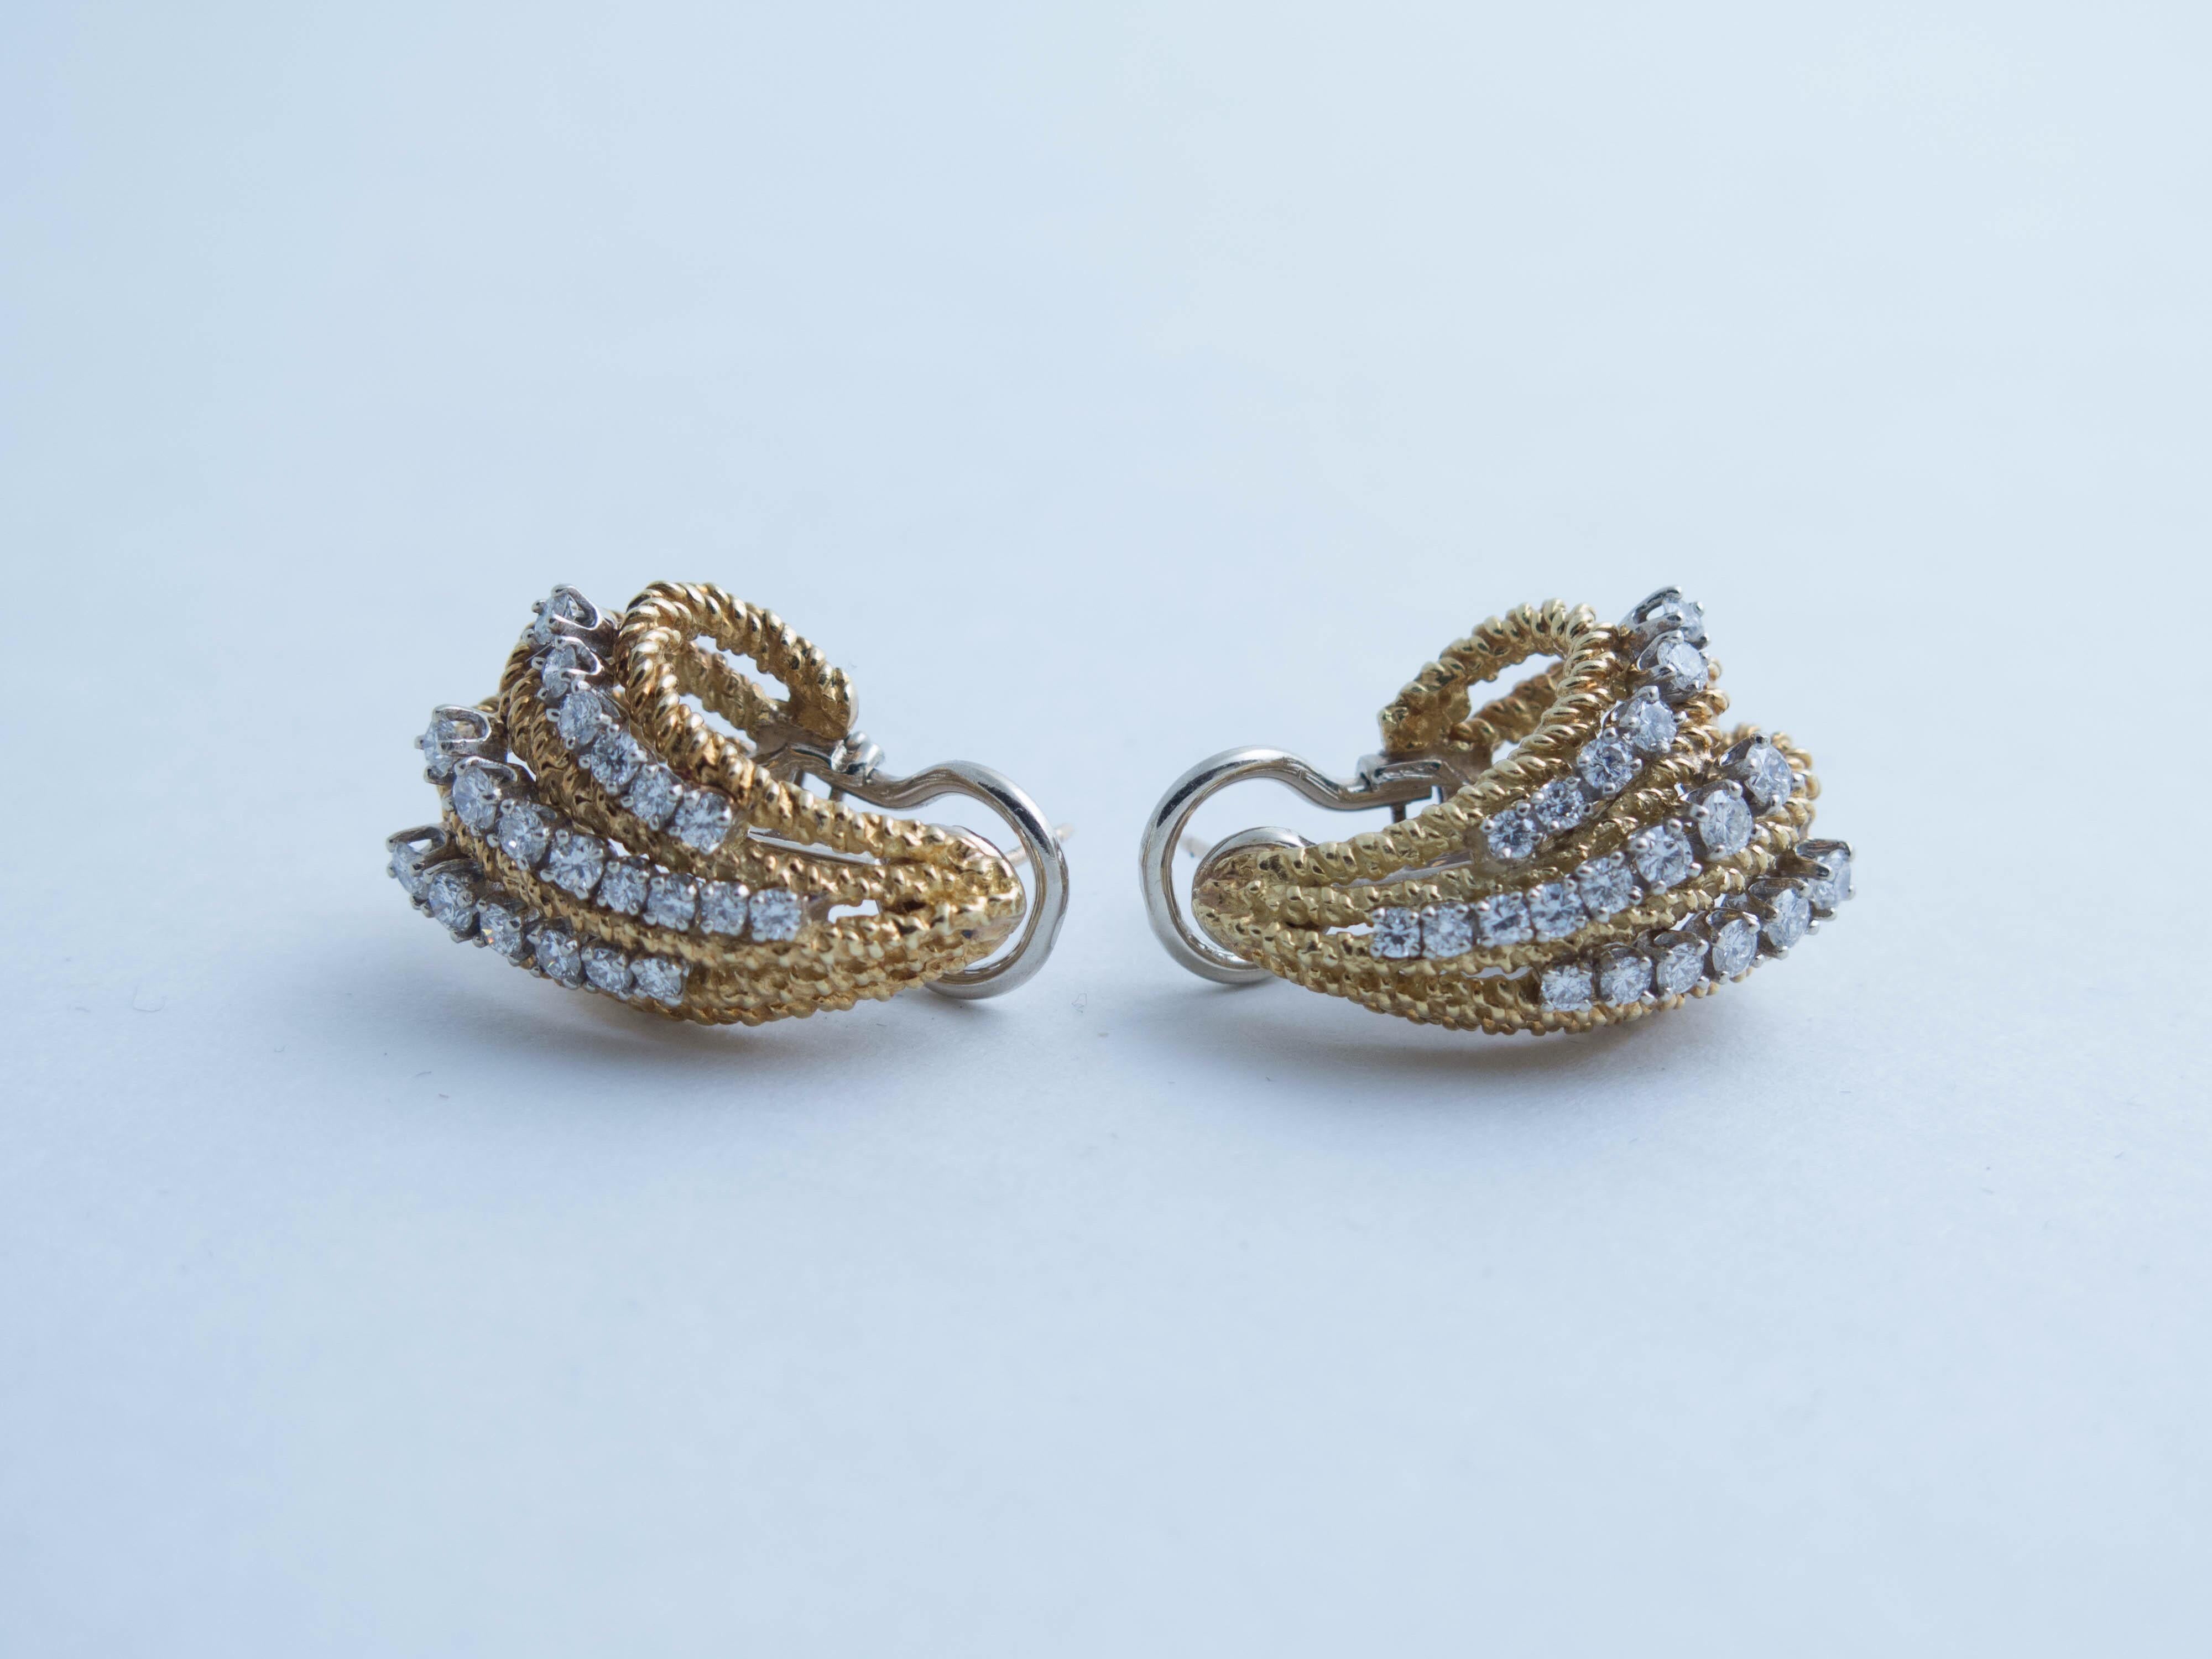 Pair of circa 1960's organic-form diamond earrings crafted in 14 K yellow gold. There are 40 round brilliant cut diamonds total weight 1.58 carats, G-H color, VS in clarity. Diamonds are set in white gold. Notched post with omega clips. Total